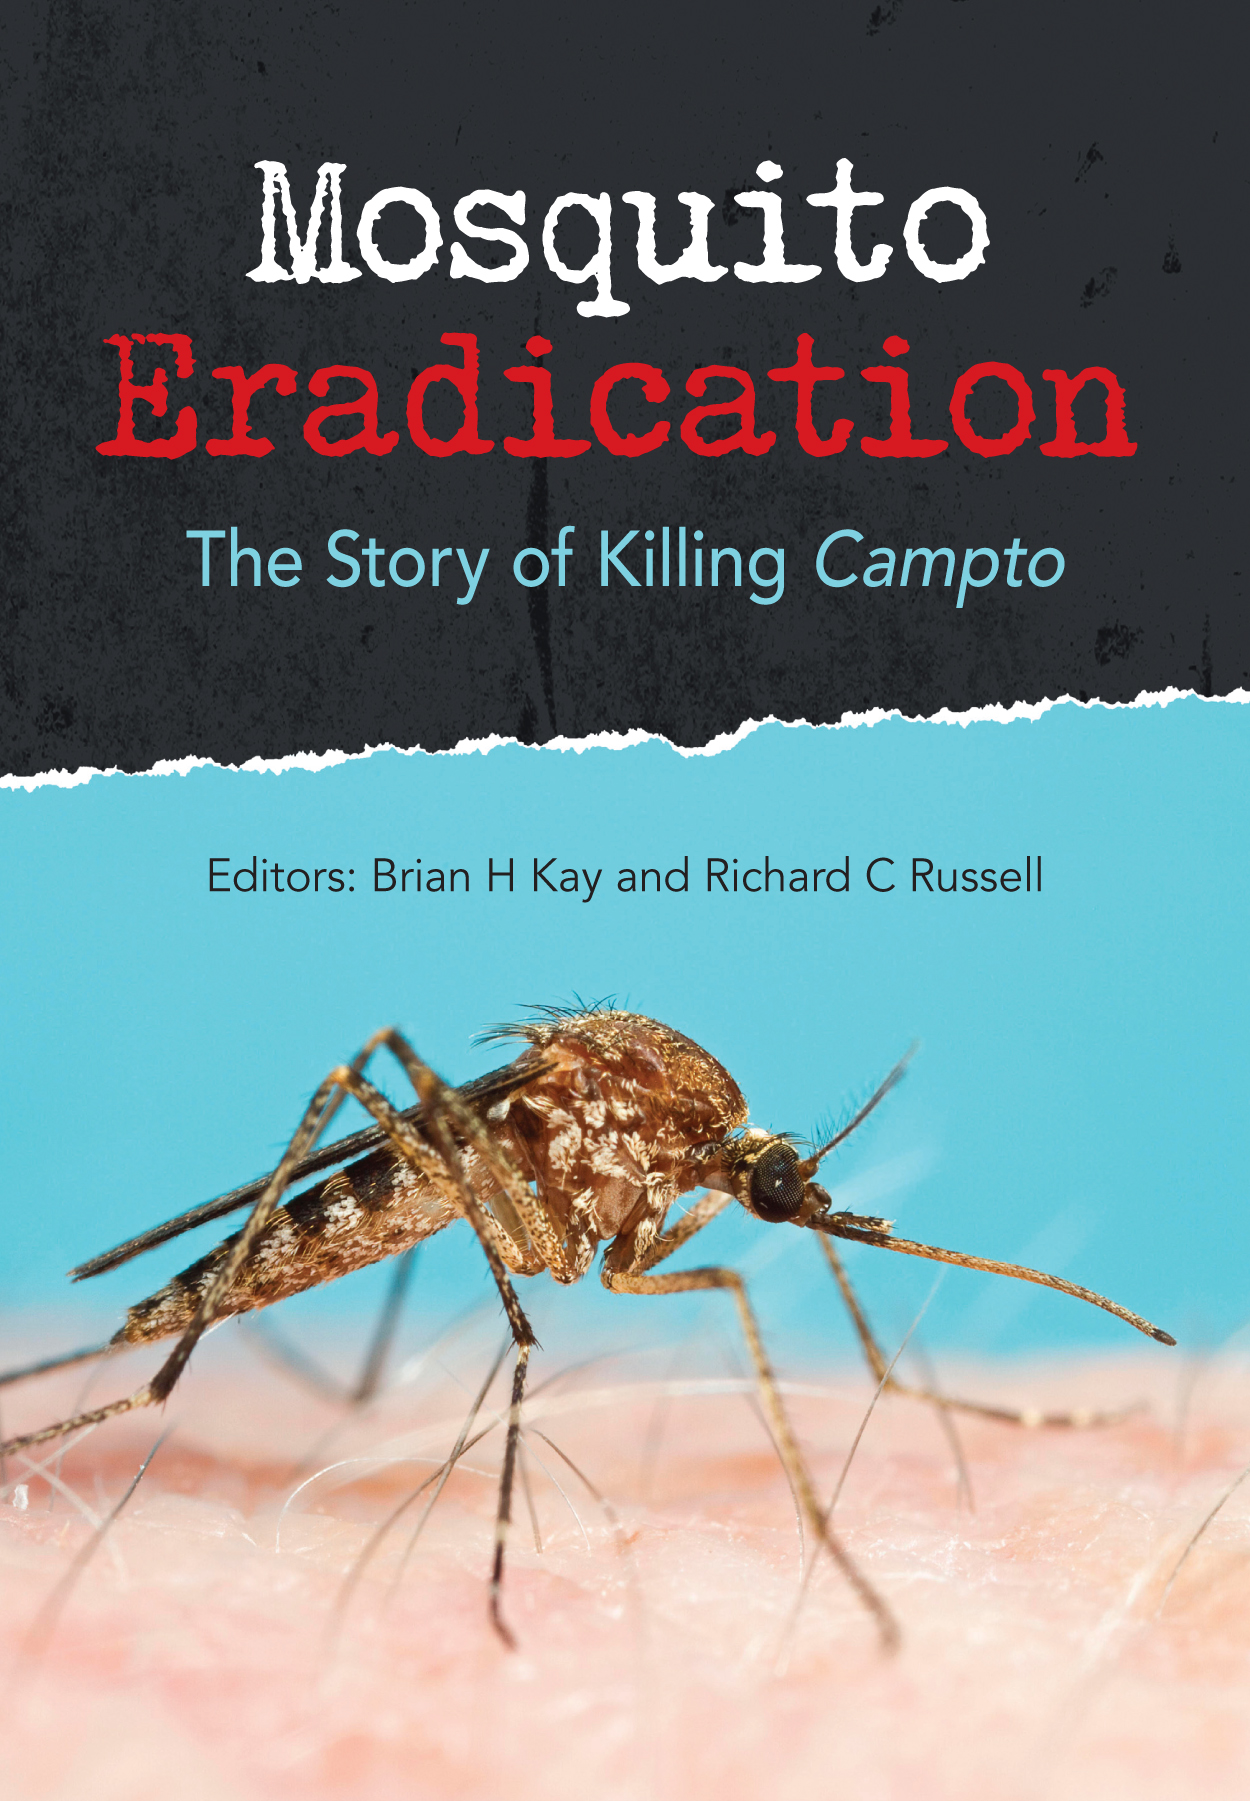 The cover image of Mosquito Eradication, featuring a close up picture of a mosquito standing on white skin against a pale blue background.